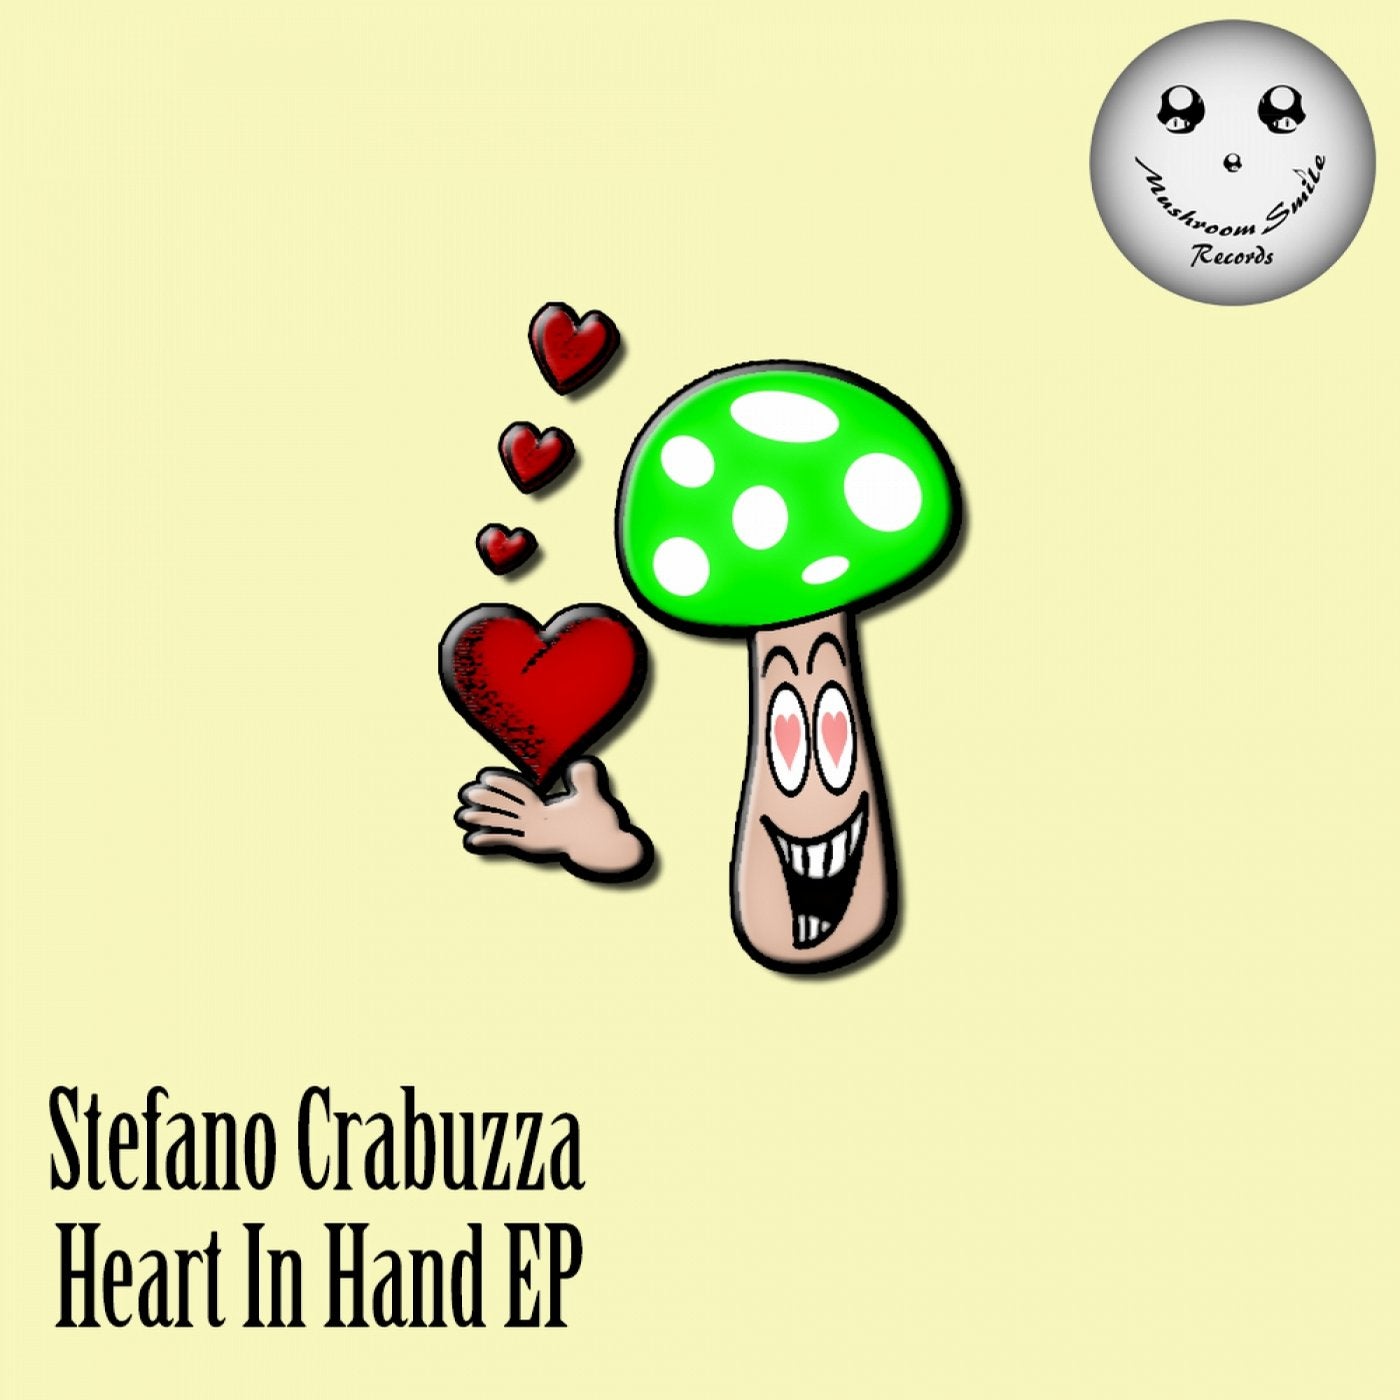 Heart In Hand EP